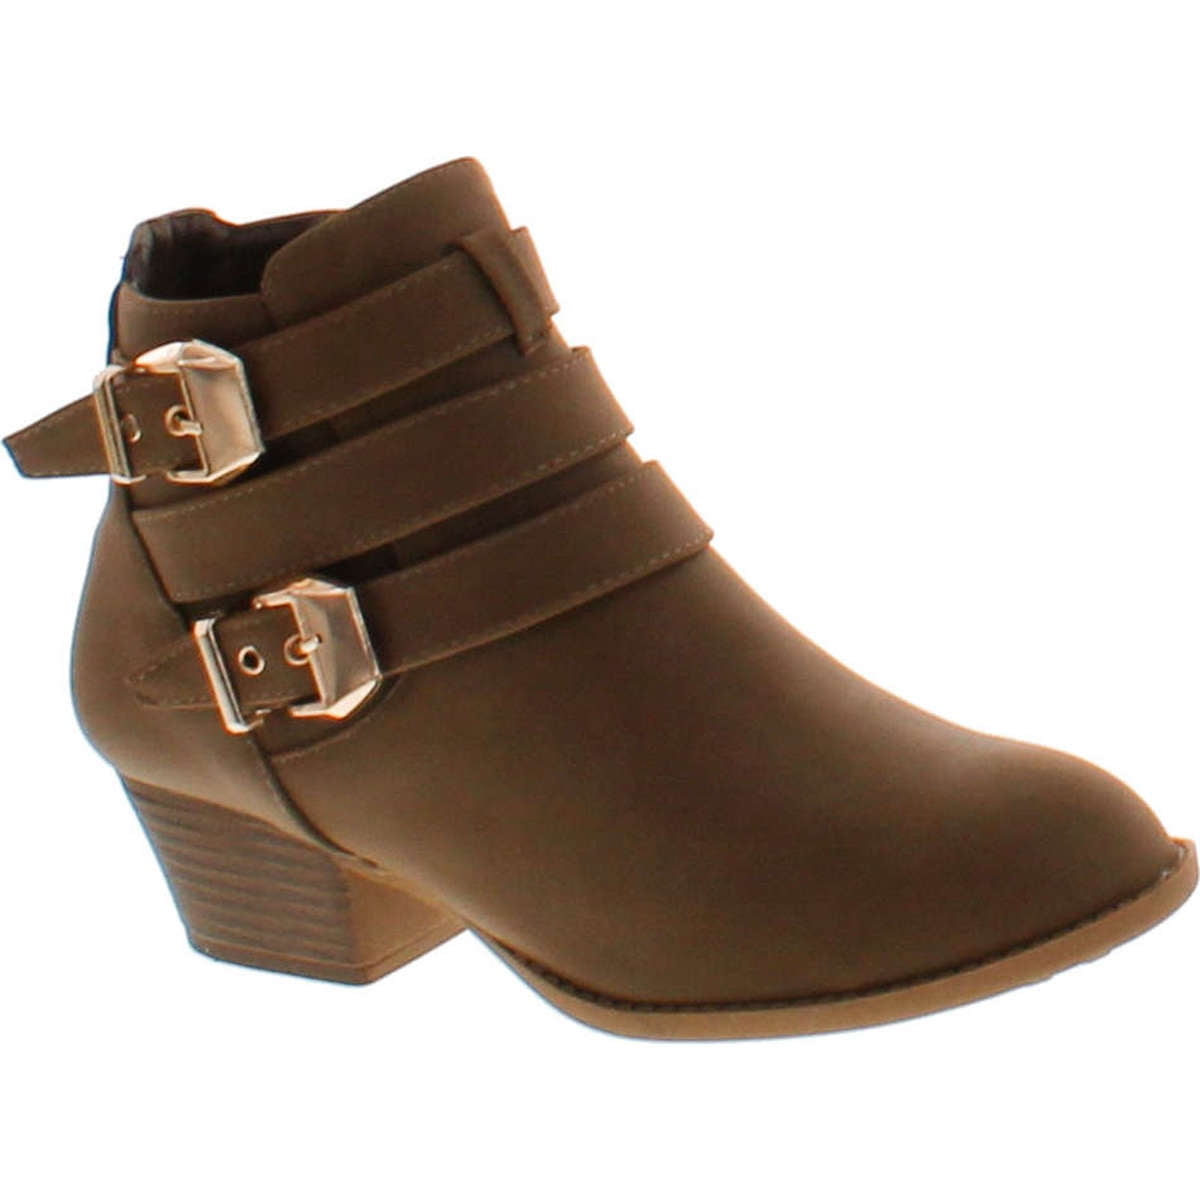 Top Moda Chase-1 Women's Buckle Strap Almond Toe Stacked Low Heel Ankle Booties